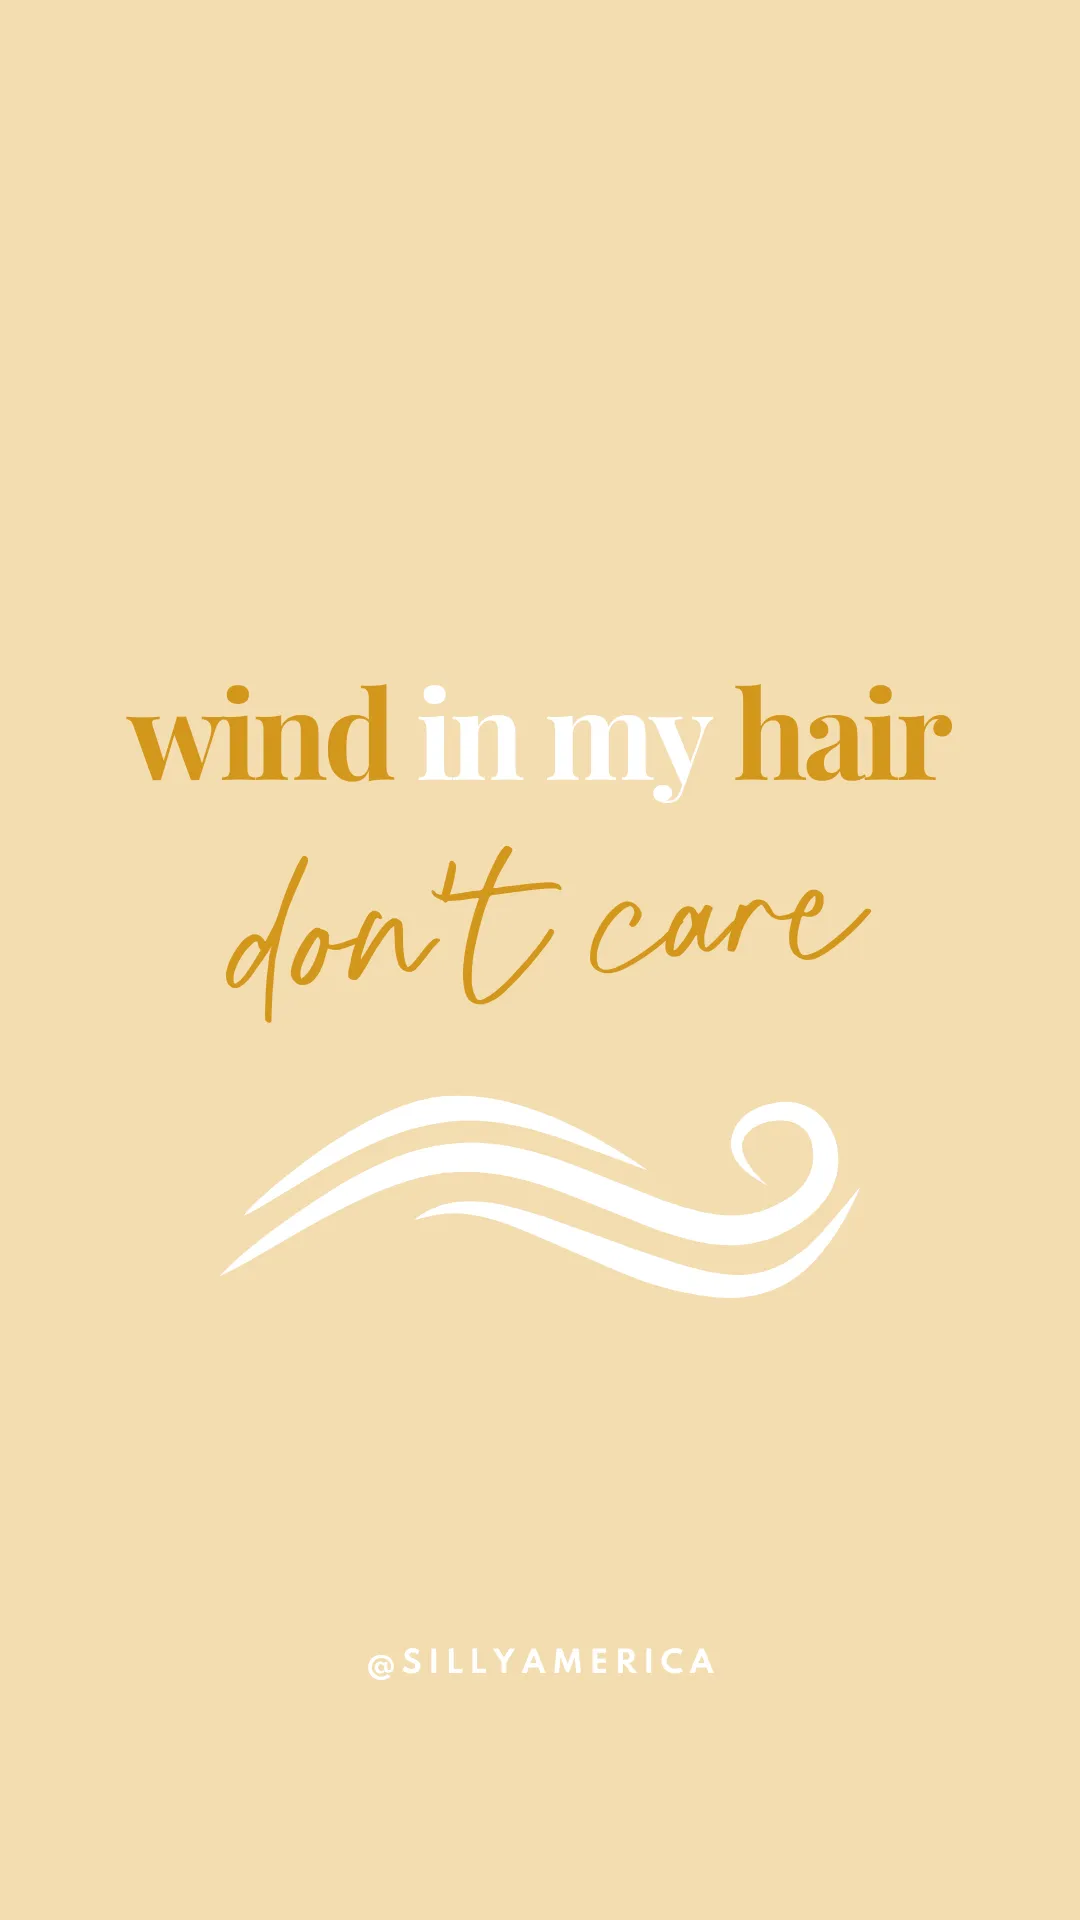 Wind in my hair. Don't care. - Road Trip Captions for Instagram